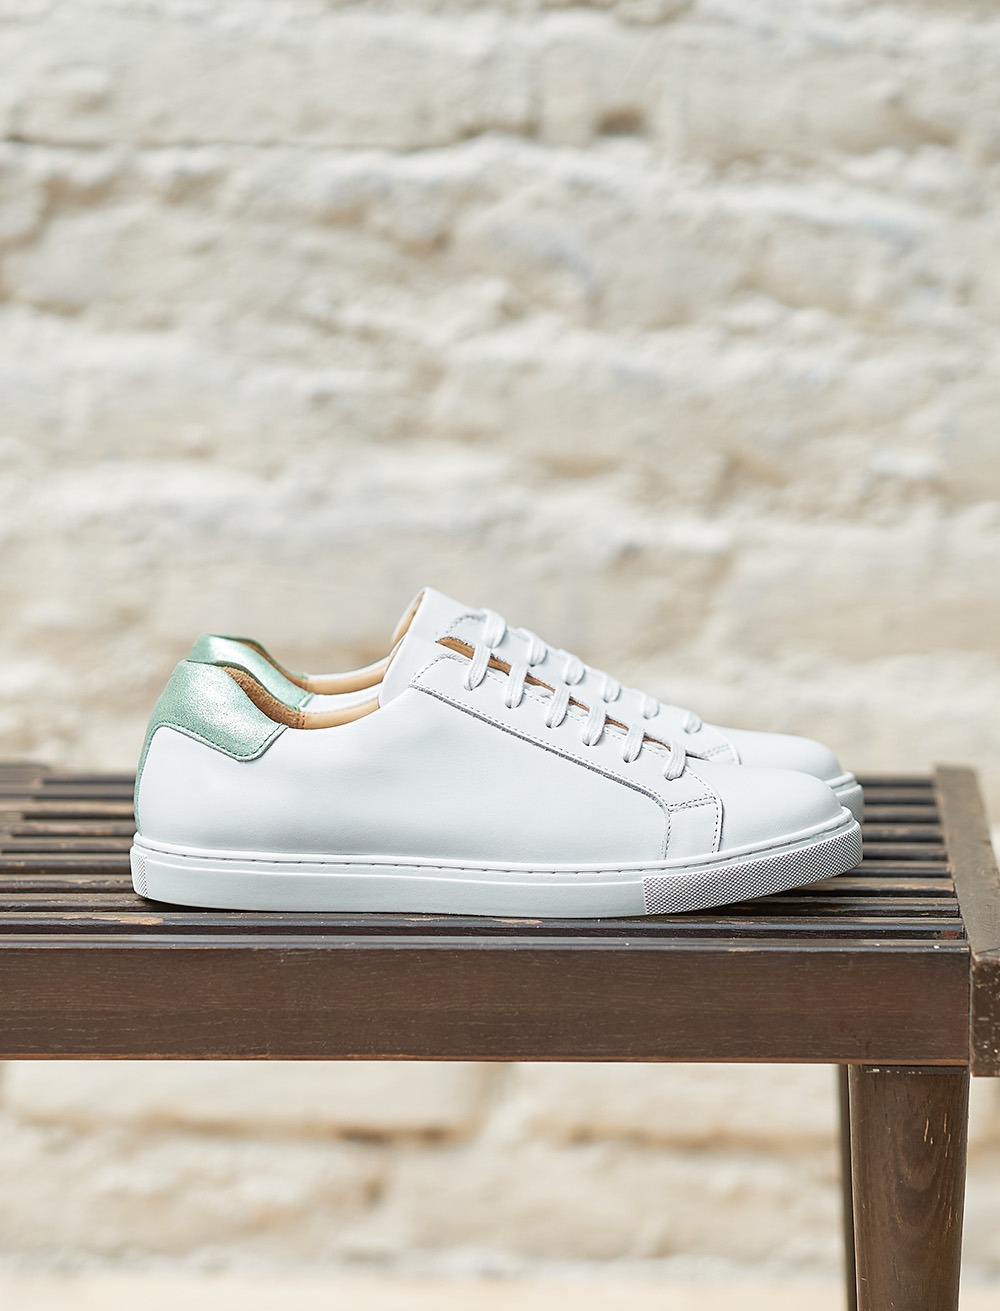 Olivia Sneakers - White and iridescent pastel green